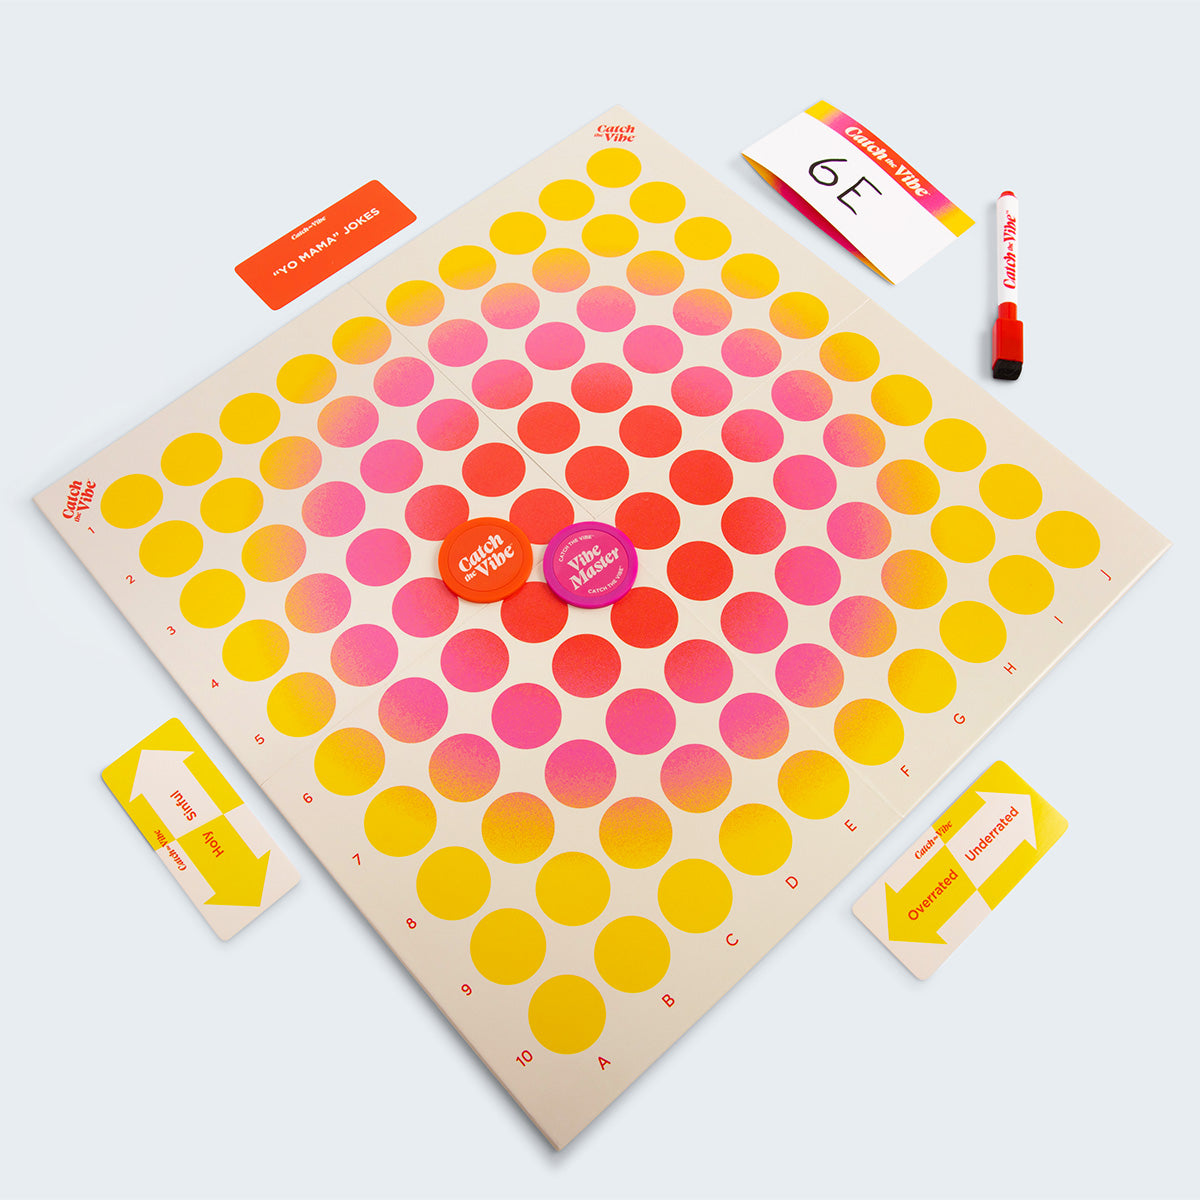 Catch The Vibe: The Party Game That Tests How Well Your Friends Know You